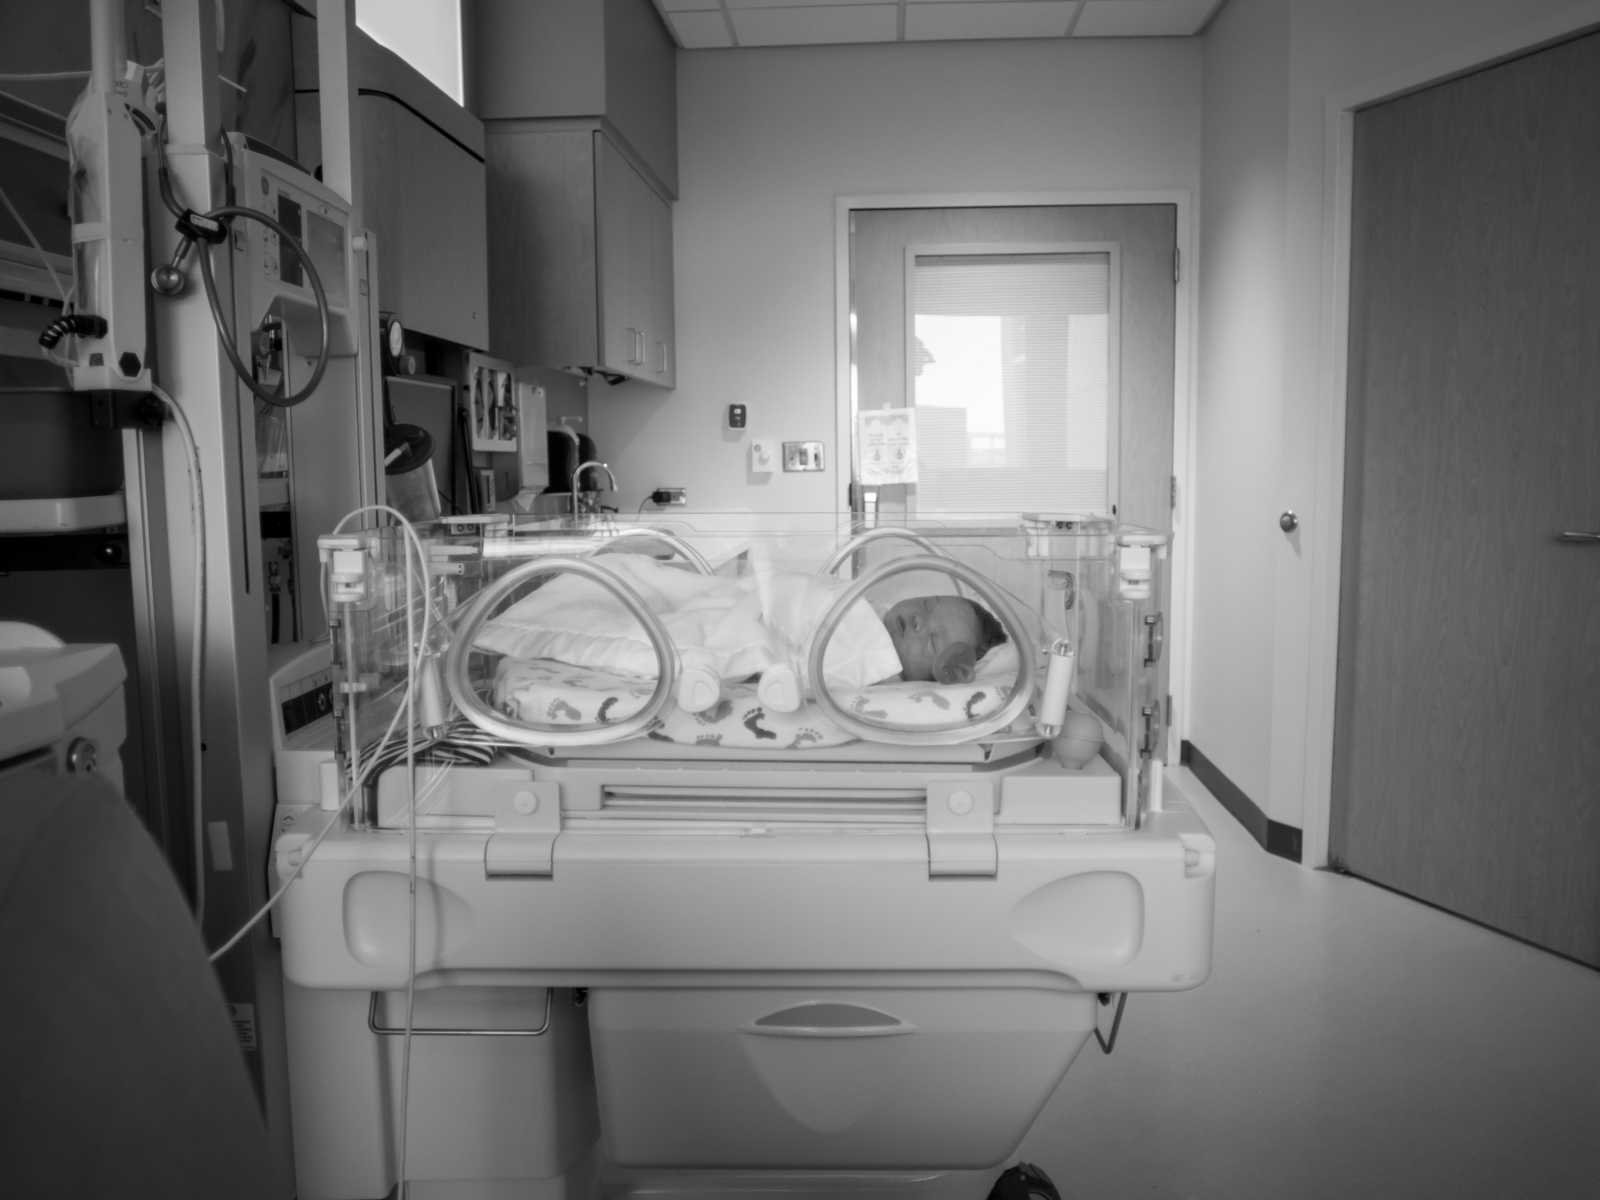 newborn swaddled in blanket in baby hospital bed hooked up to machines in black and white